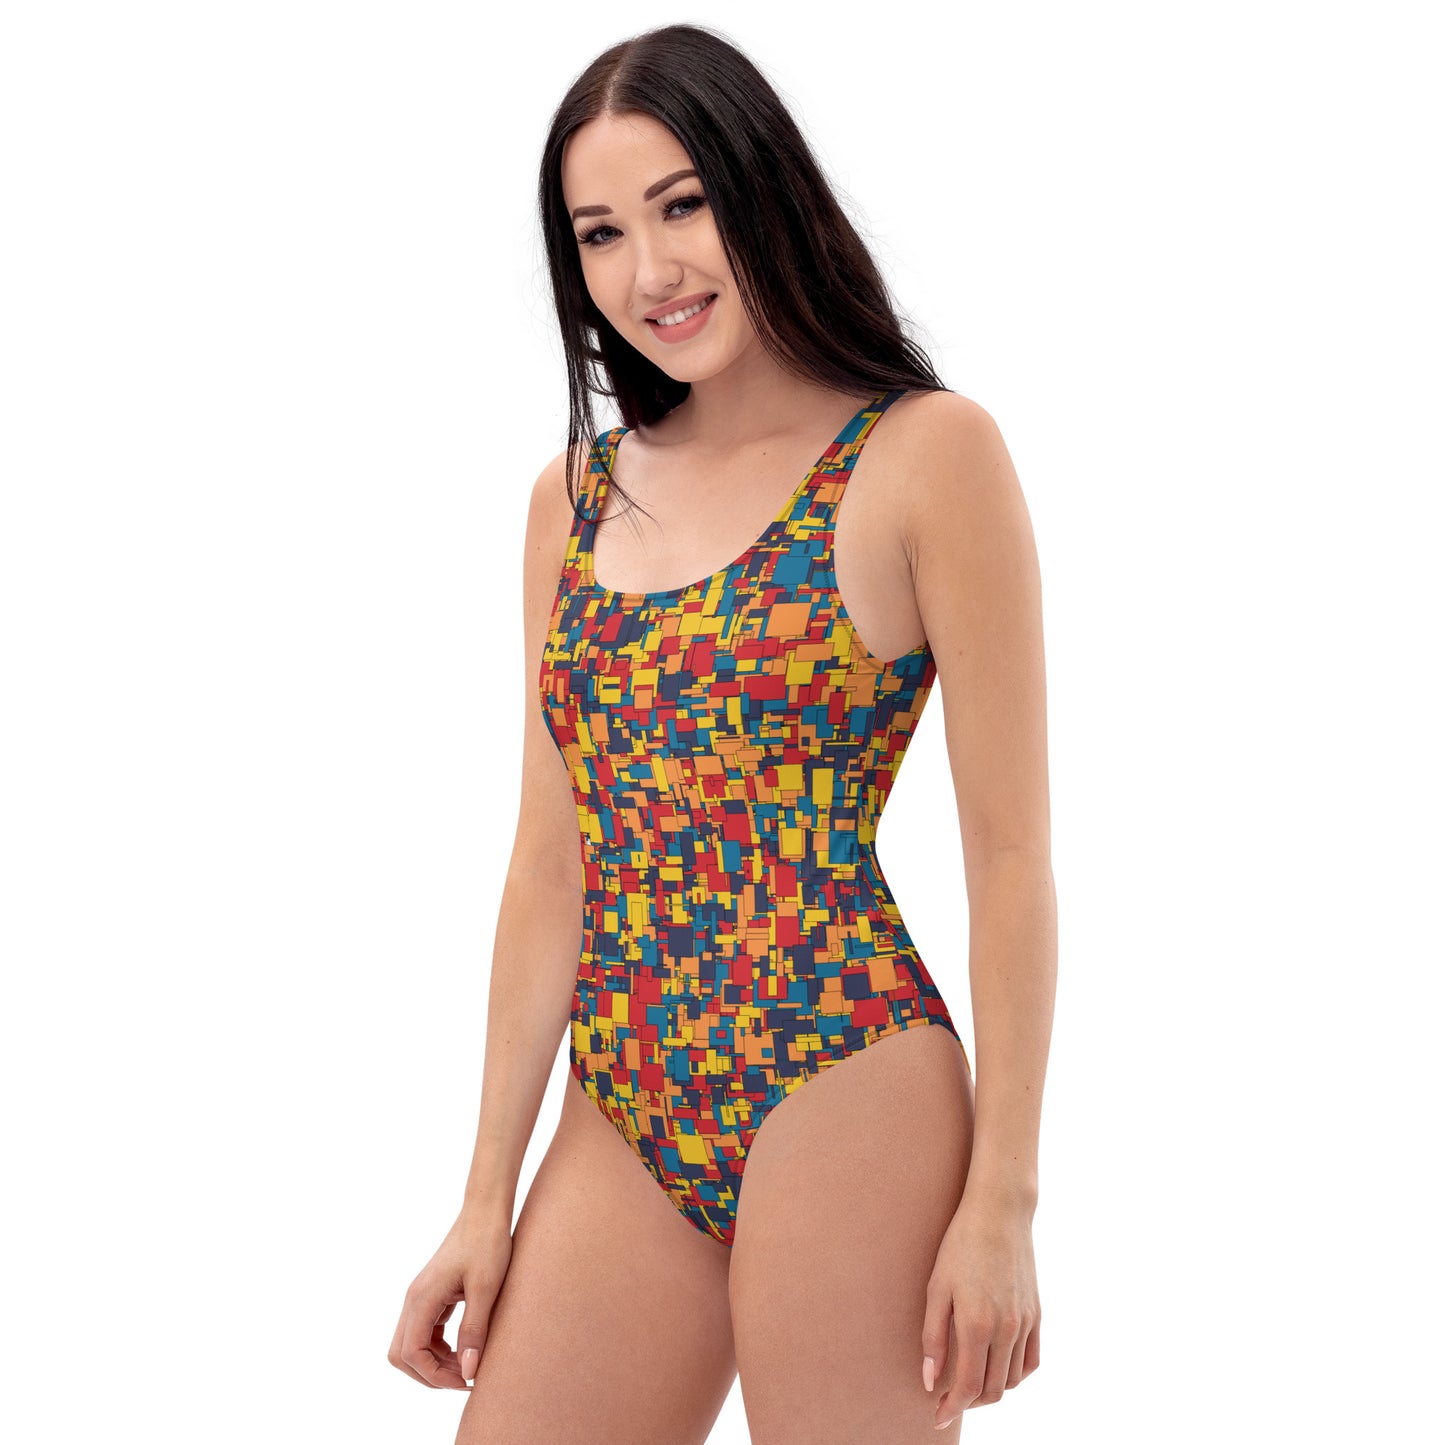 Be Bold and Beautiful with Our Vibrant Patterned Swimsuit - Make Waves this Season!